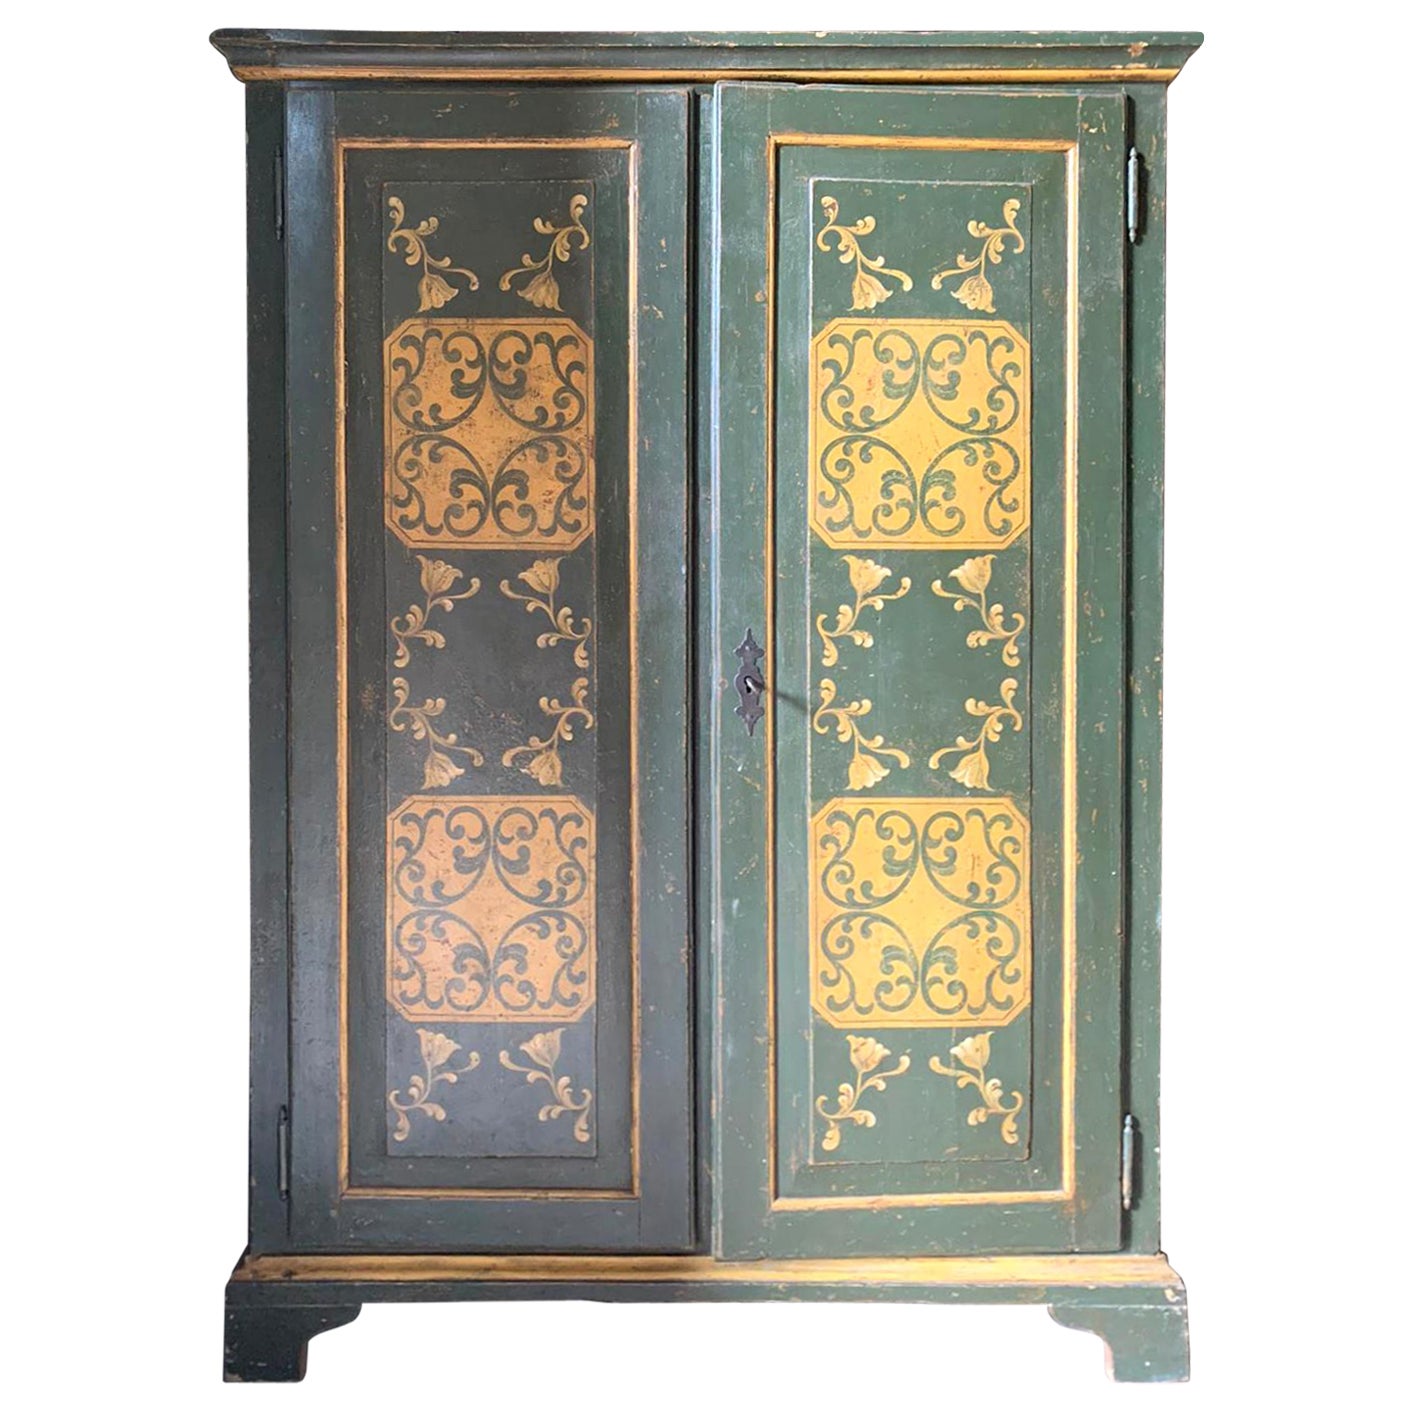 Antique Green and Yellow Painted Double Door Wardrobe, 19th Century Italy